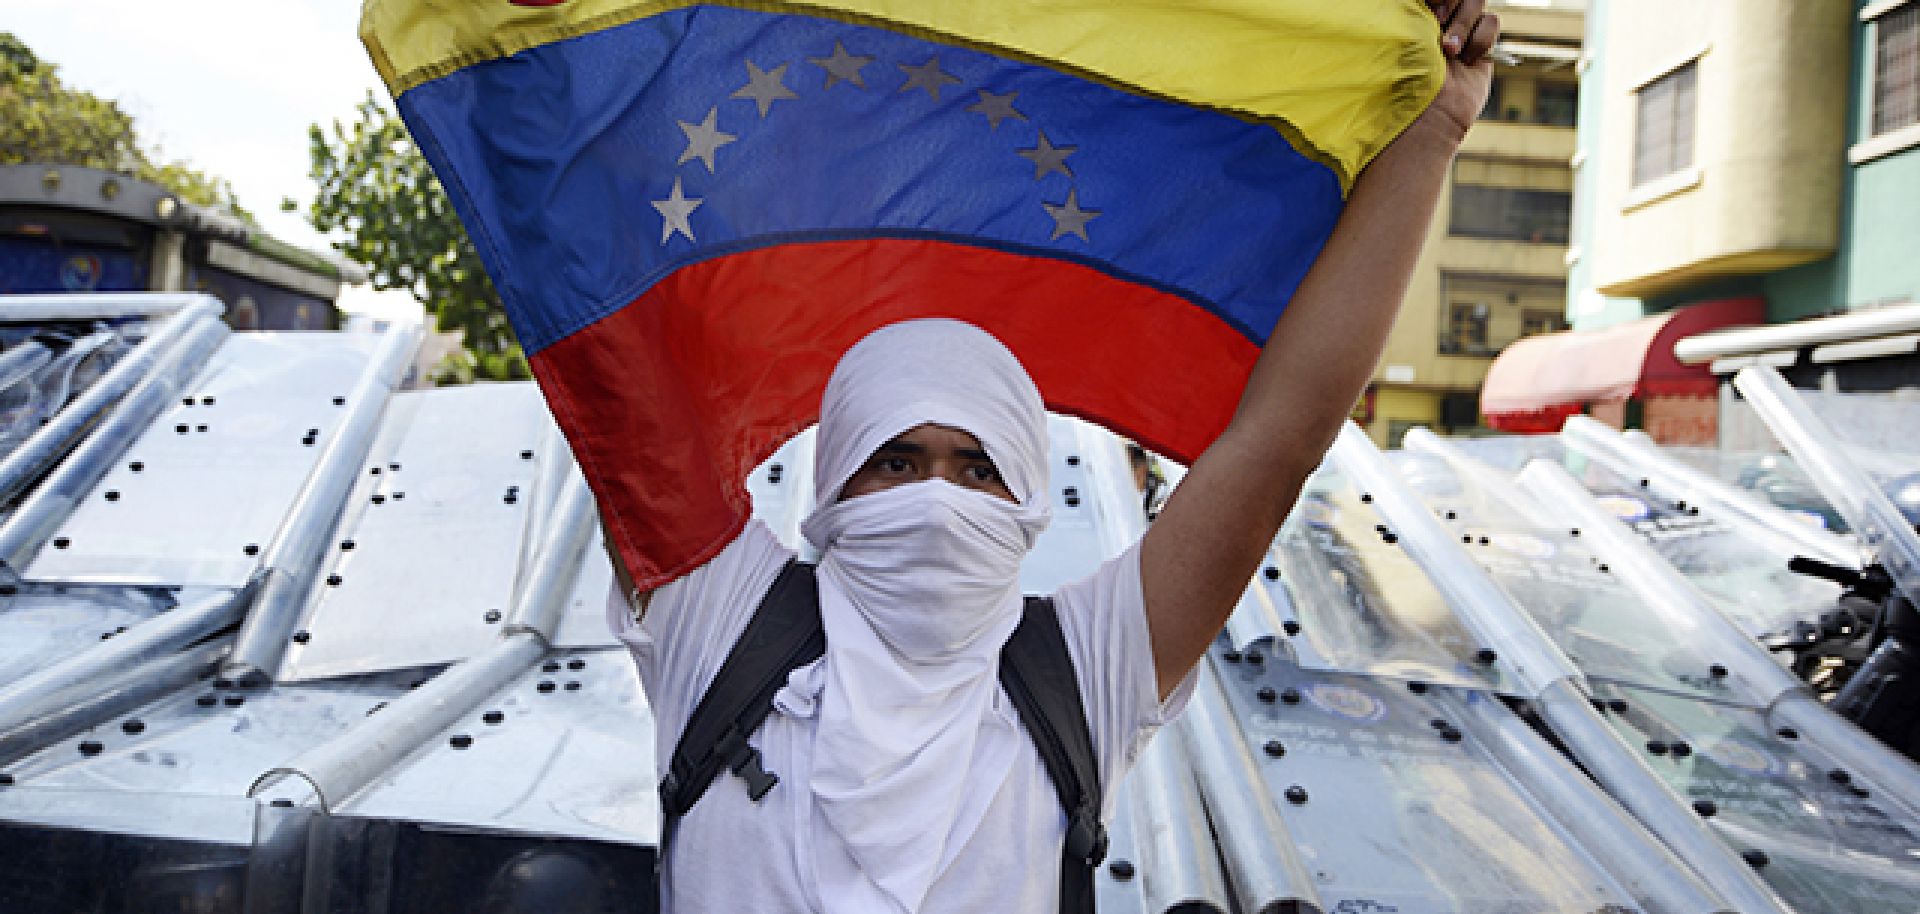 Venezuela's Growing Protests Are Not Yet a Danger to the Government